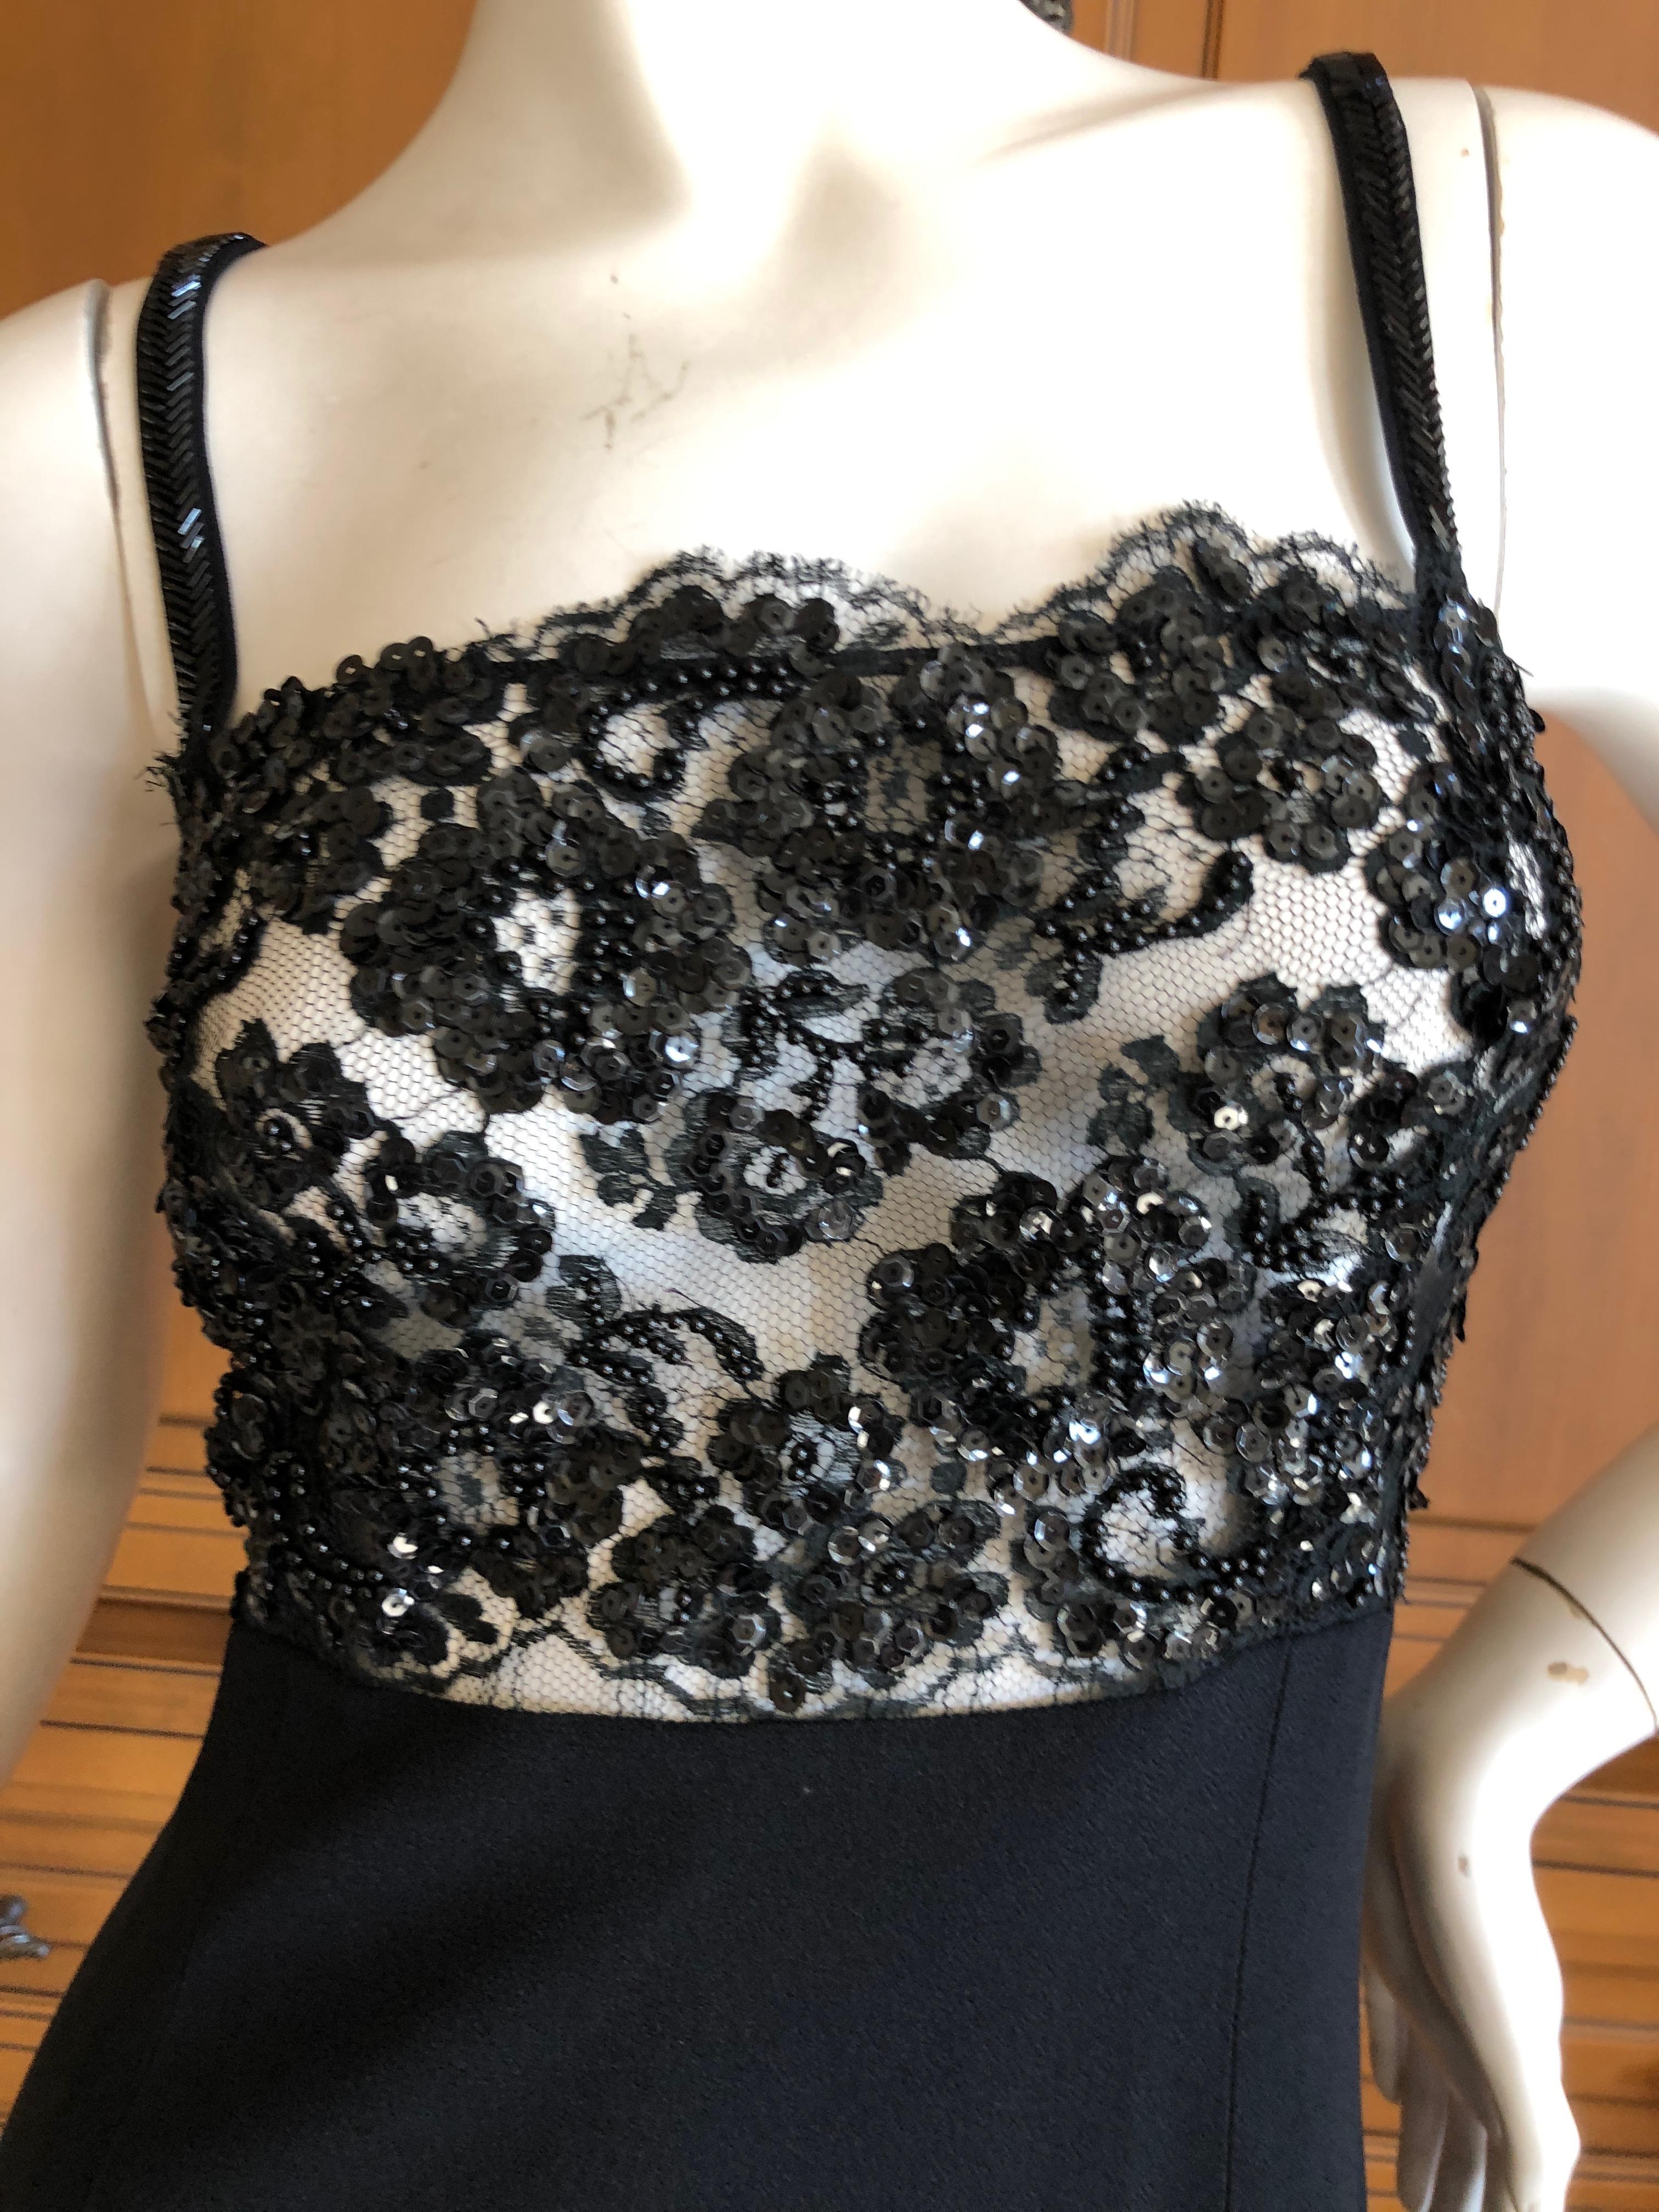 Sonia Rykiel LBD with Sheer Sequin Accented Lace Bodice In Excellent Condition For Sale In Cloverdale, CA